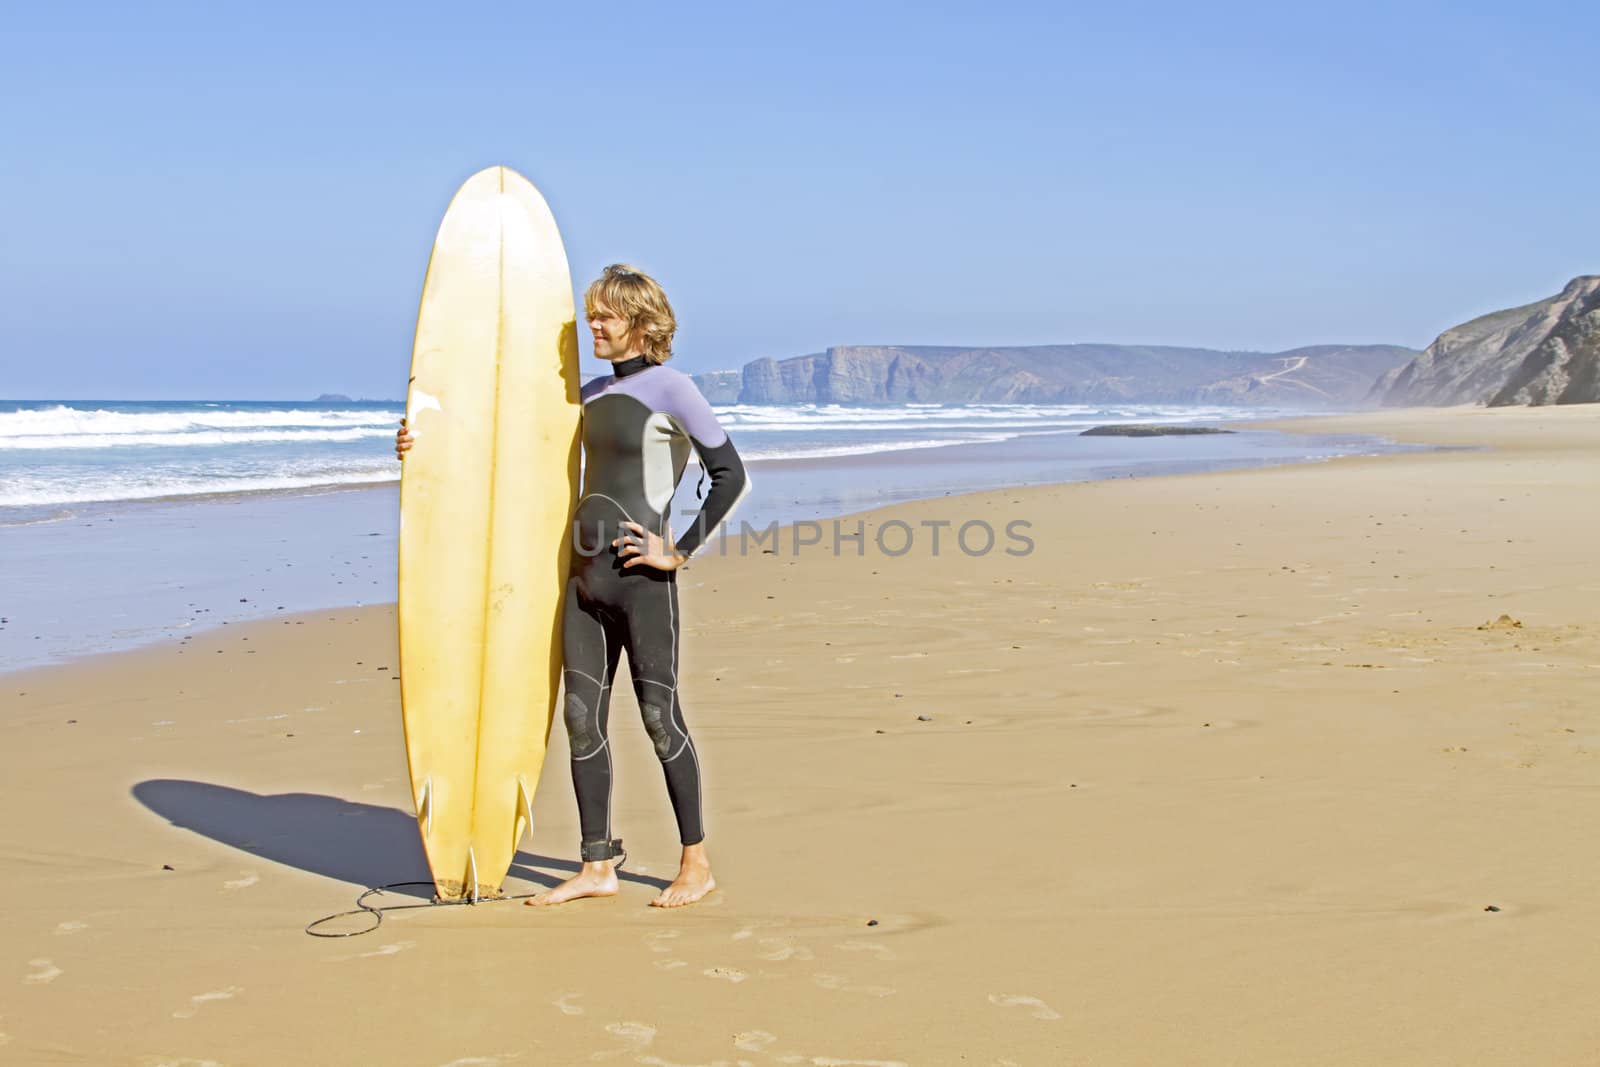 Surfer with his surfboard at the beach by devy